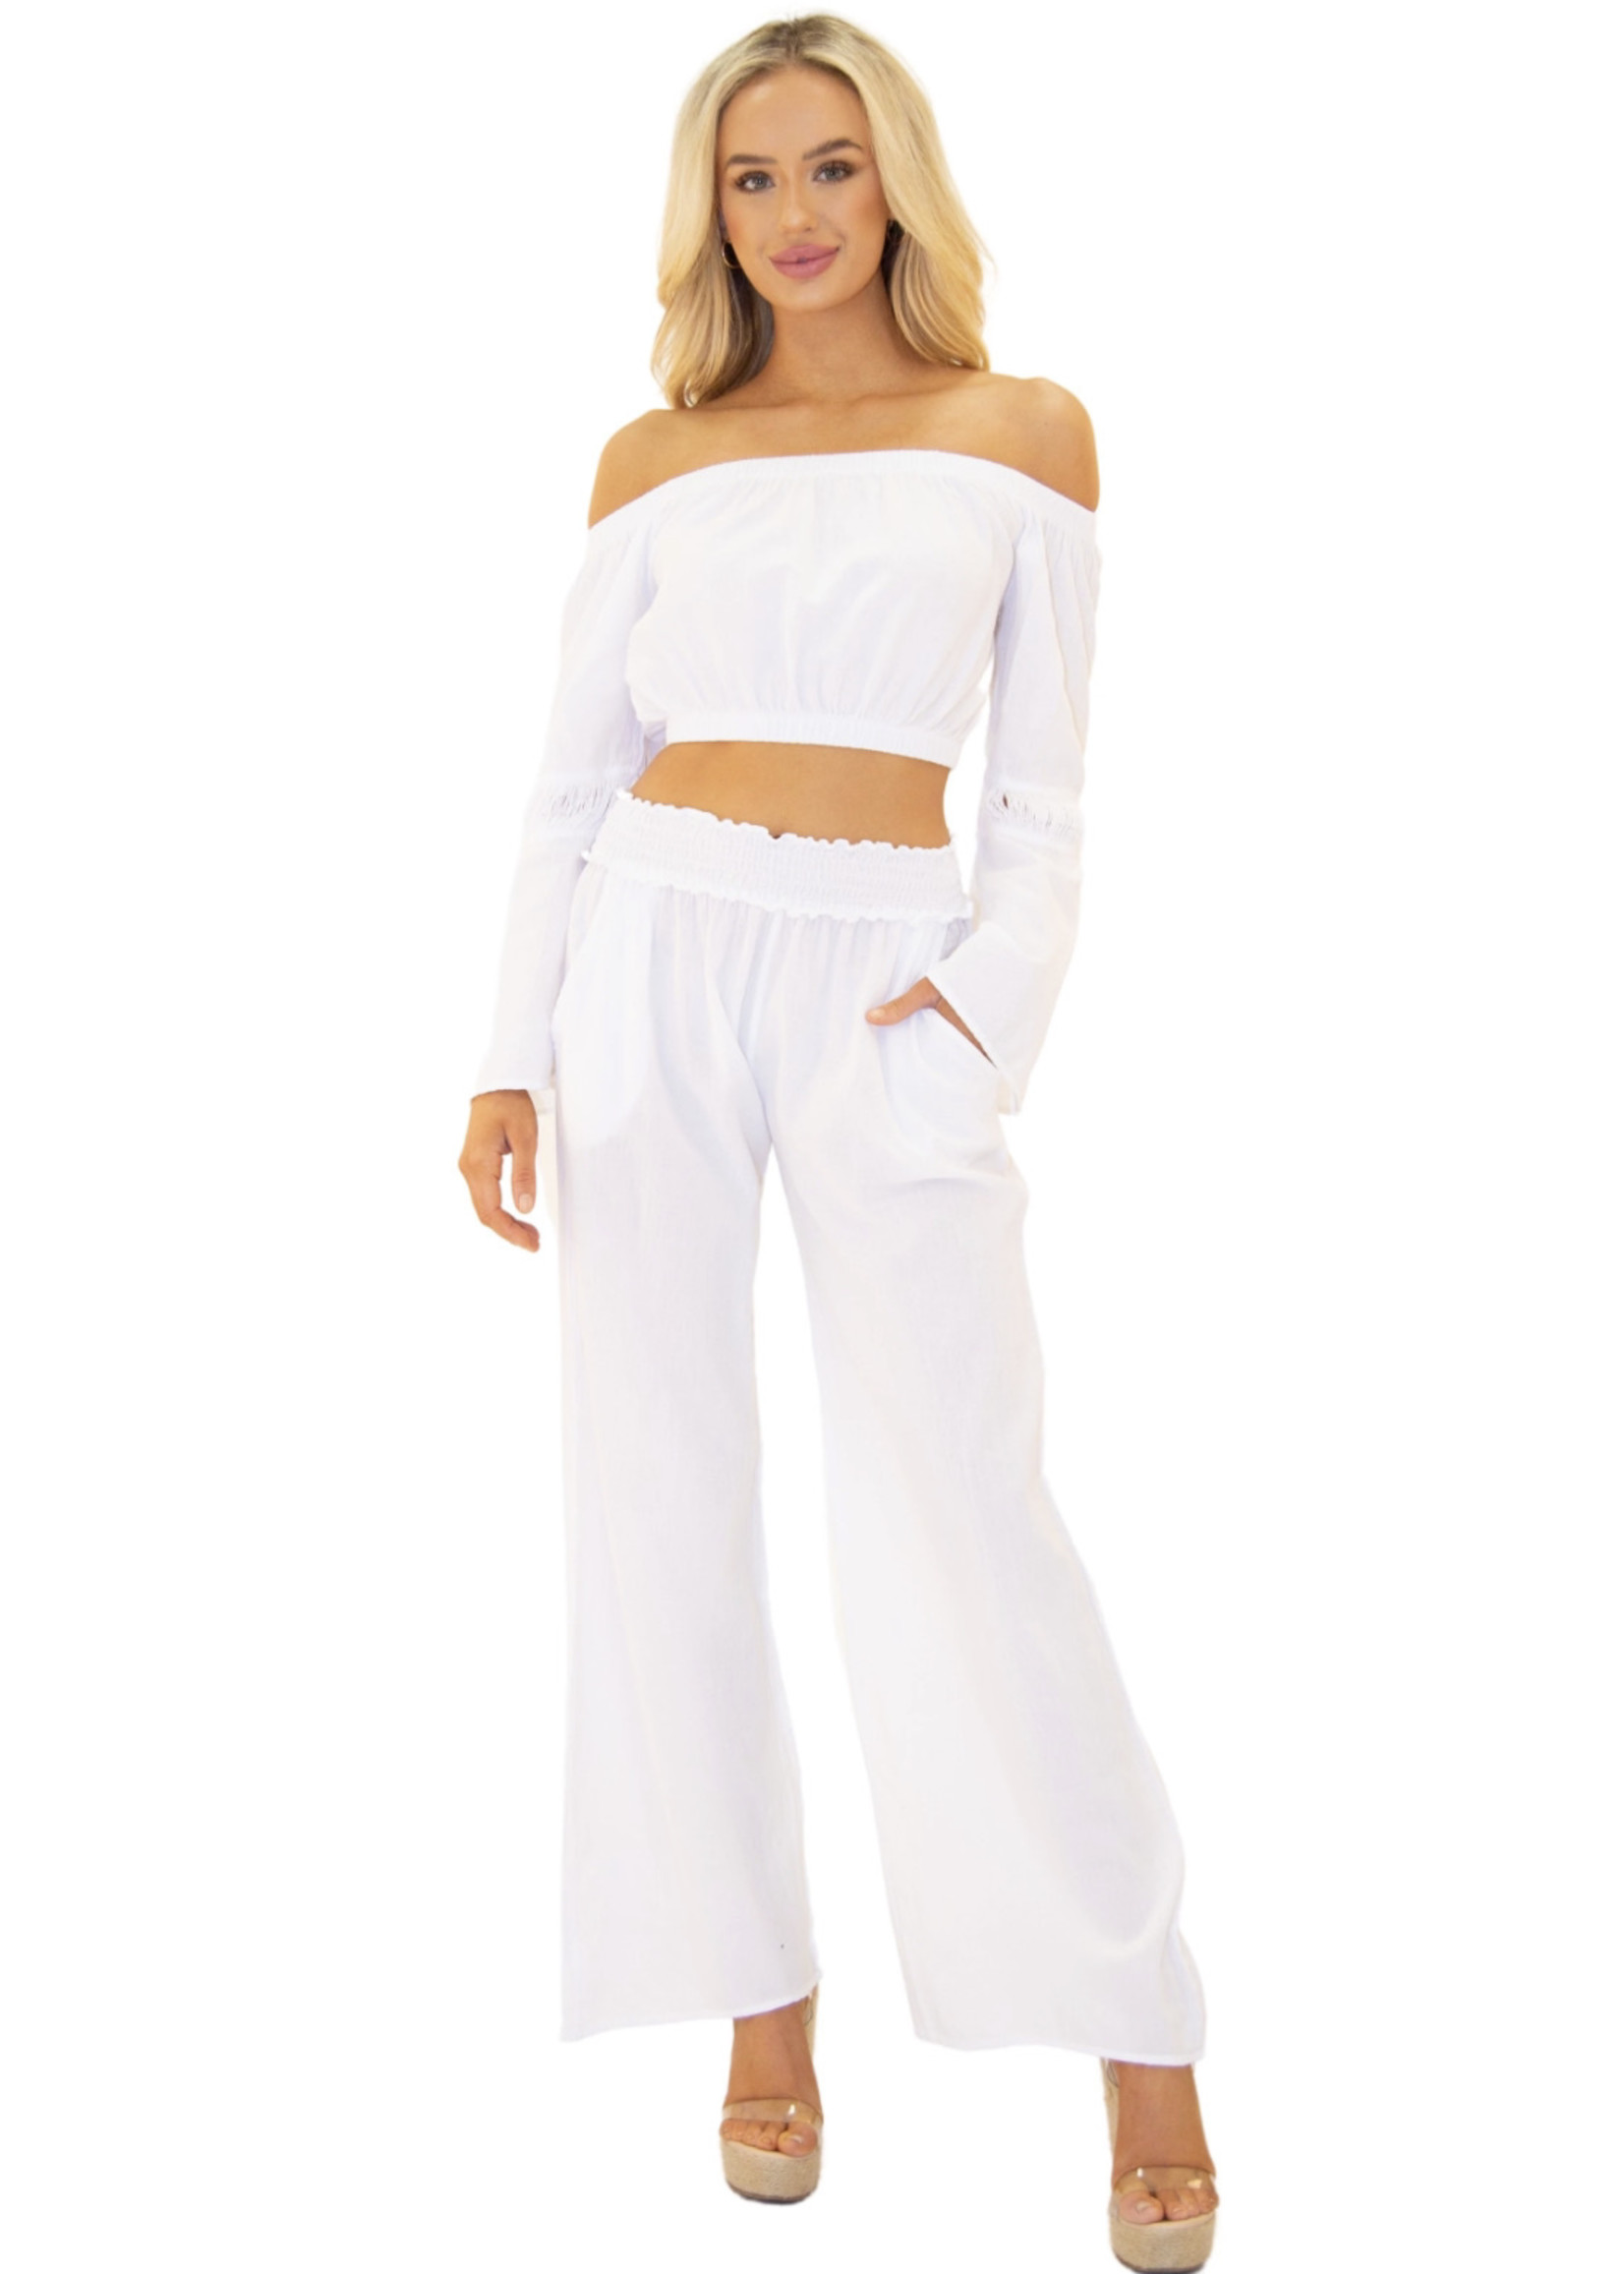 NEO NYC INC 'Soleil' Wide Leg Pants White - NW137905